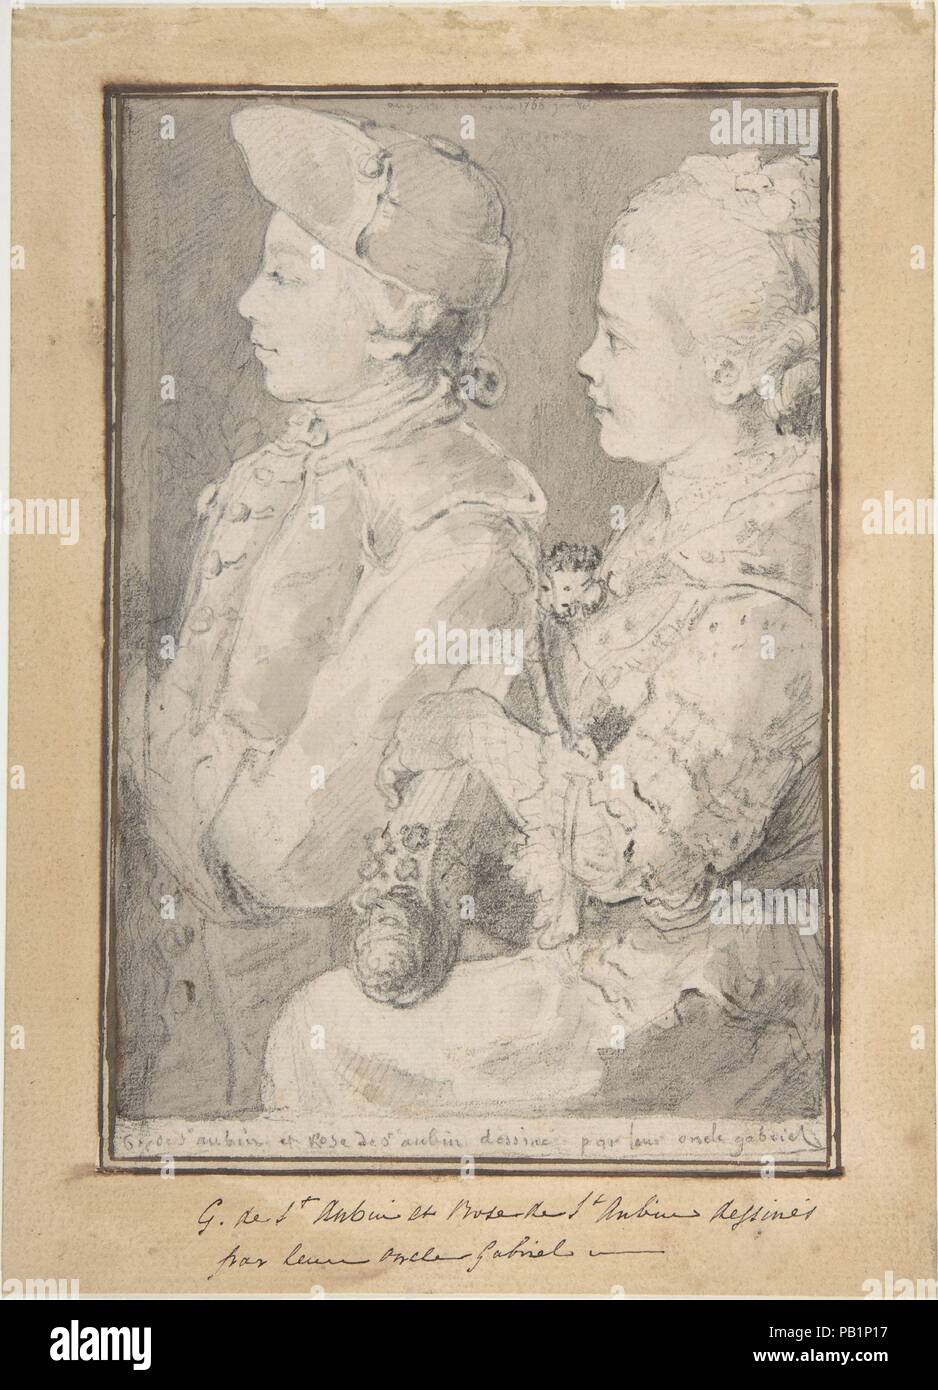 Germain-Augustin and Rose de Saint-Aubin, Drawn by Their Uncle. Artist: Gabriel de Saint-Aubin (French, Paris 1724-1780 Paris). Dimensions: 7 3/16 x 4 13/16 in.  (18.2 x 12.2 cm). Date: 1766.  During the Rococo period, French artists frequently depicted children, sometimes at play and spontaneous in their gestures and expressions, but also engaged in study, their education the foundation for the future of society. In 1766, Saint-Aubin, a draftsman and chronicler of Parisian cultural life, drew a portrait of his niece and nephew in profile. Based on preparatory studies made after life, this fin Stock Photo